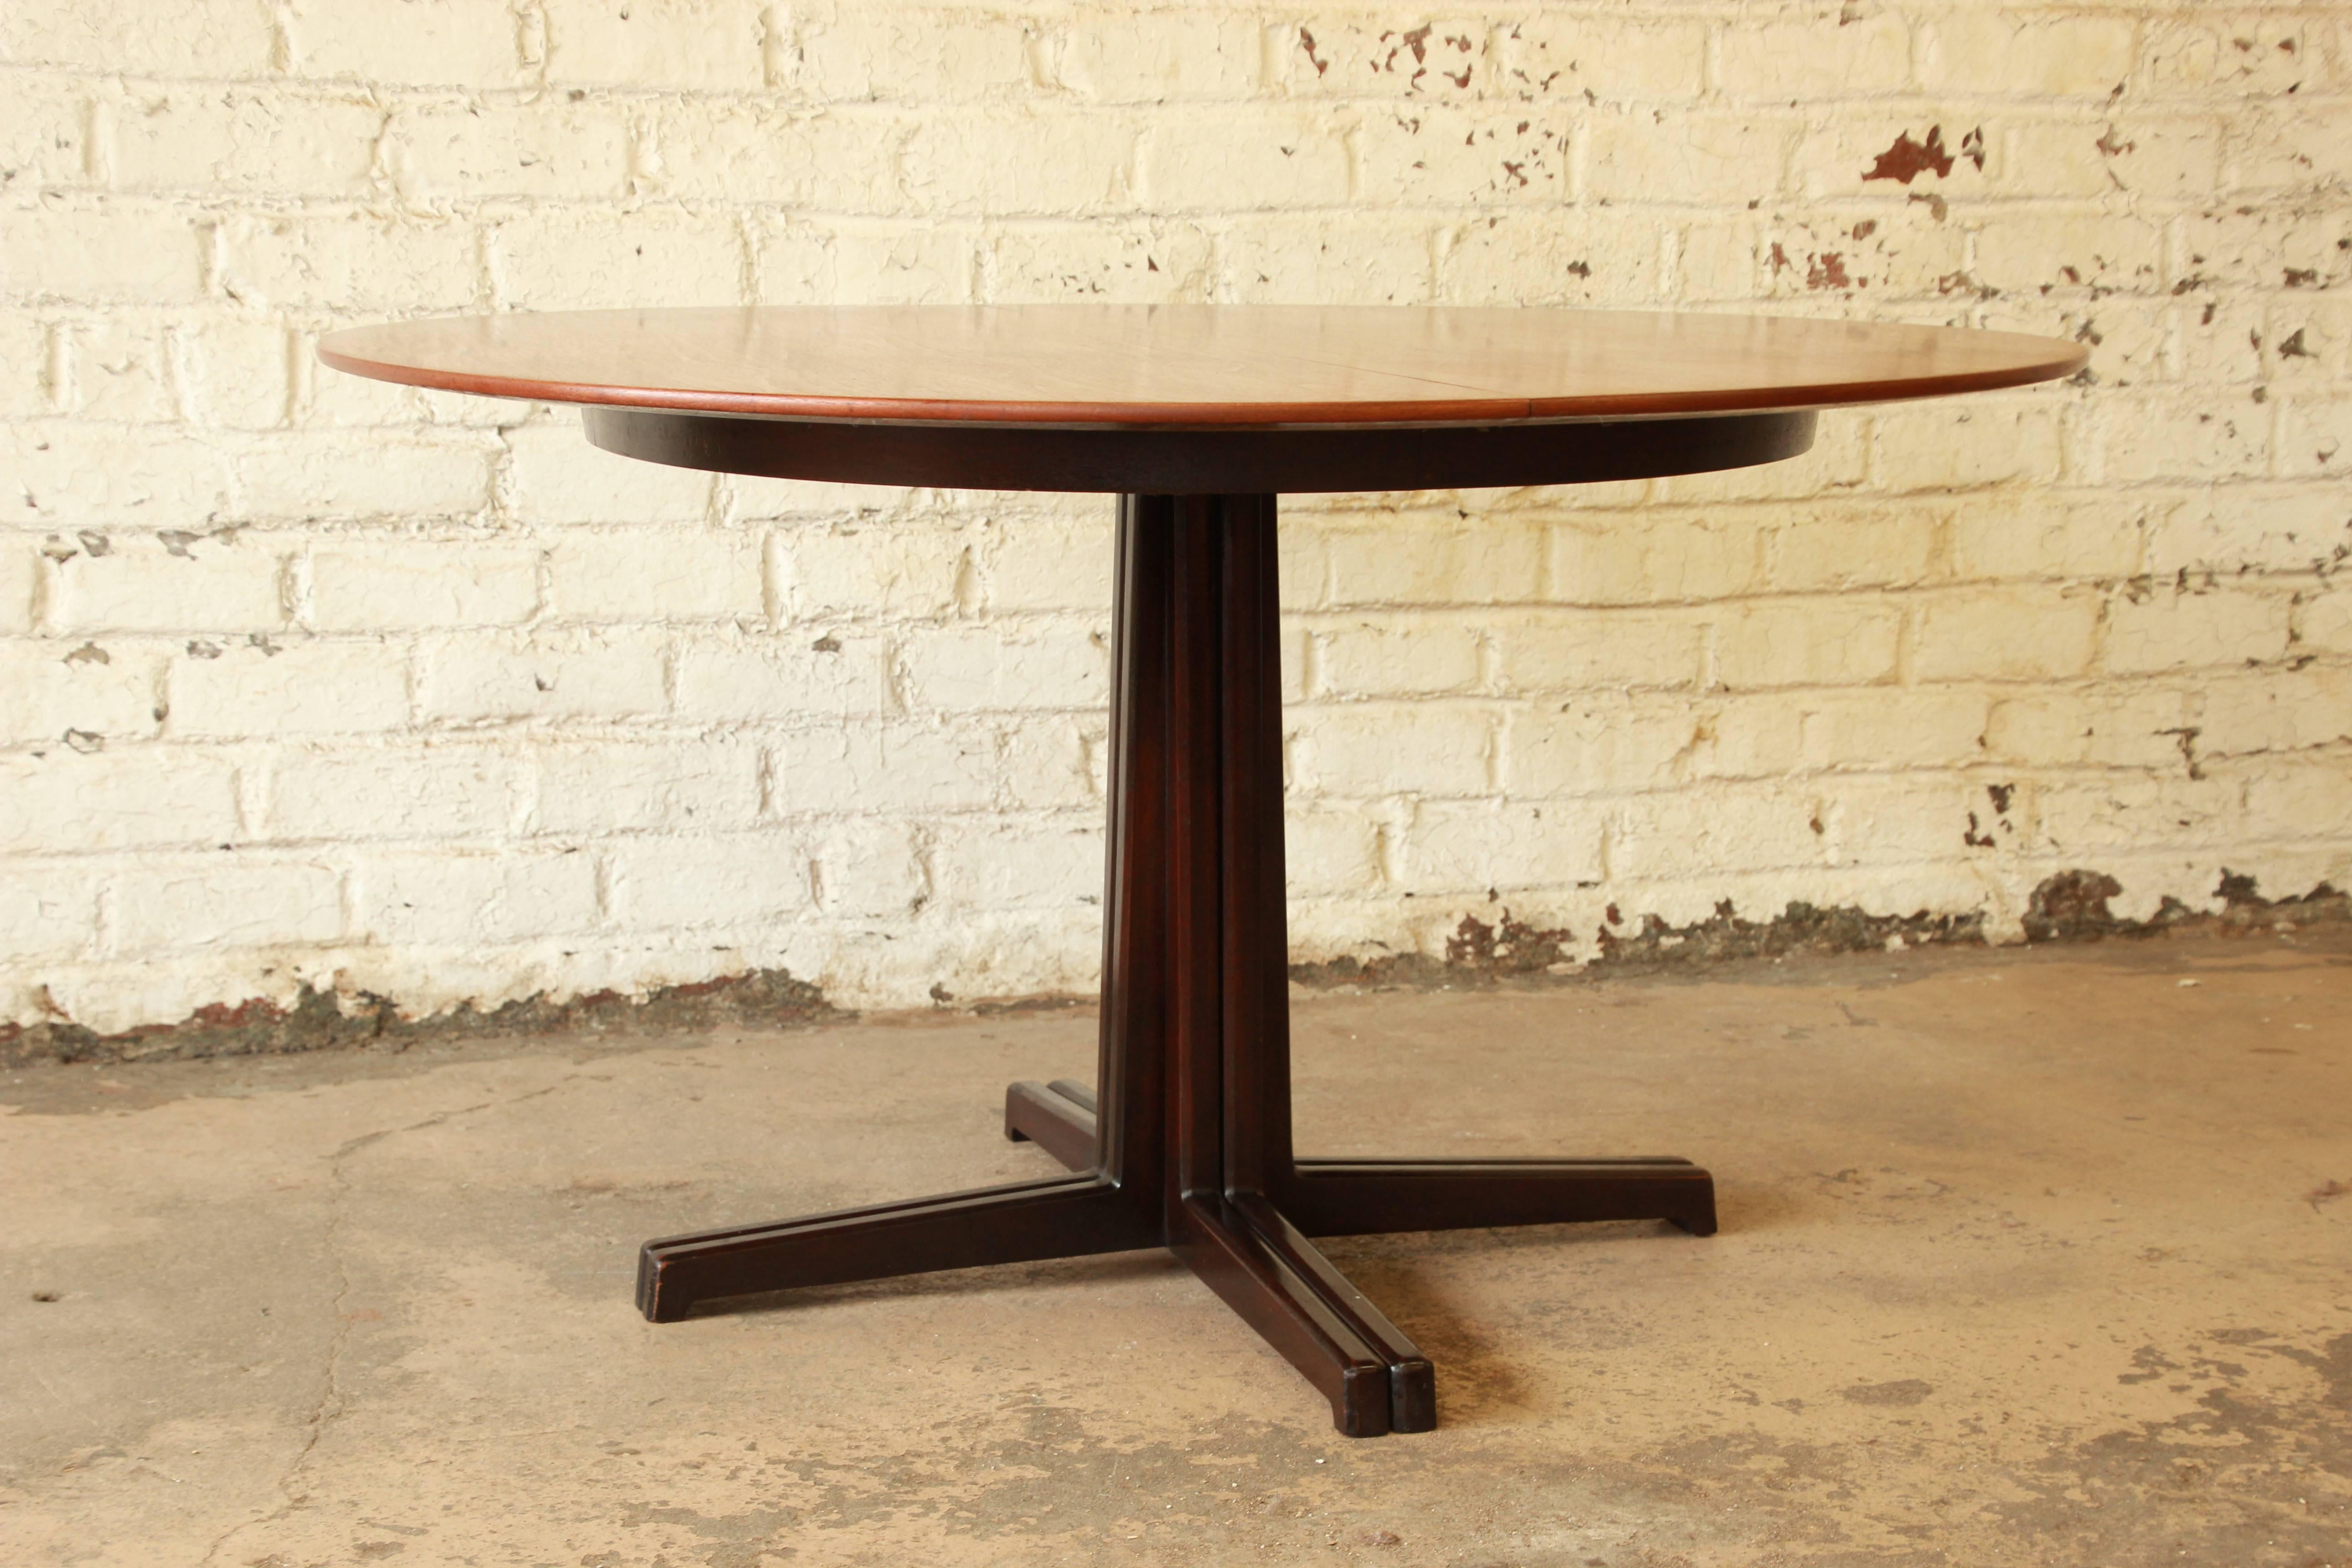 A gorgeous sculptural extension dining table in walnut designed by Edward Wormley for Dunbar, circa 1950s. Classic Wormley design, with clean, sleek Mid-Century Modern lines. It features a nicely grained walnut top with a solid walnut base. The